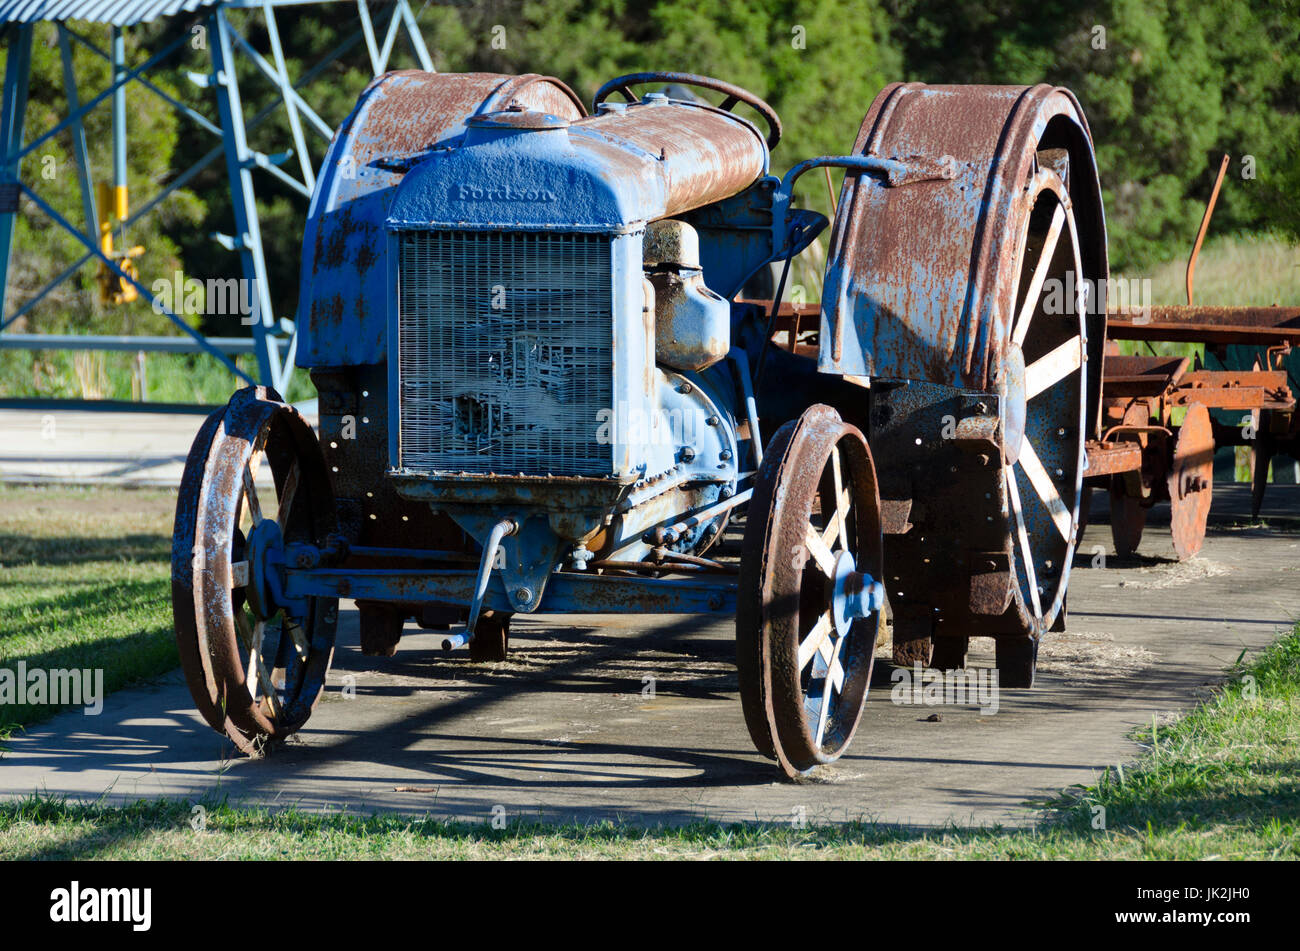 Old Fordson tractor, Templin Historical Village Museum, Boonah, Queensland, Australia Stock Photo